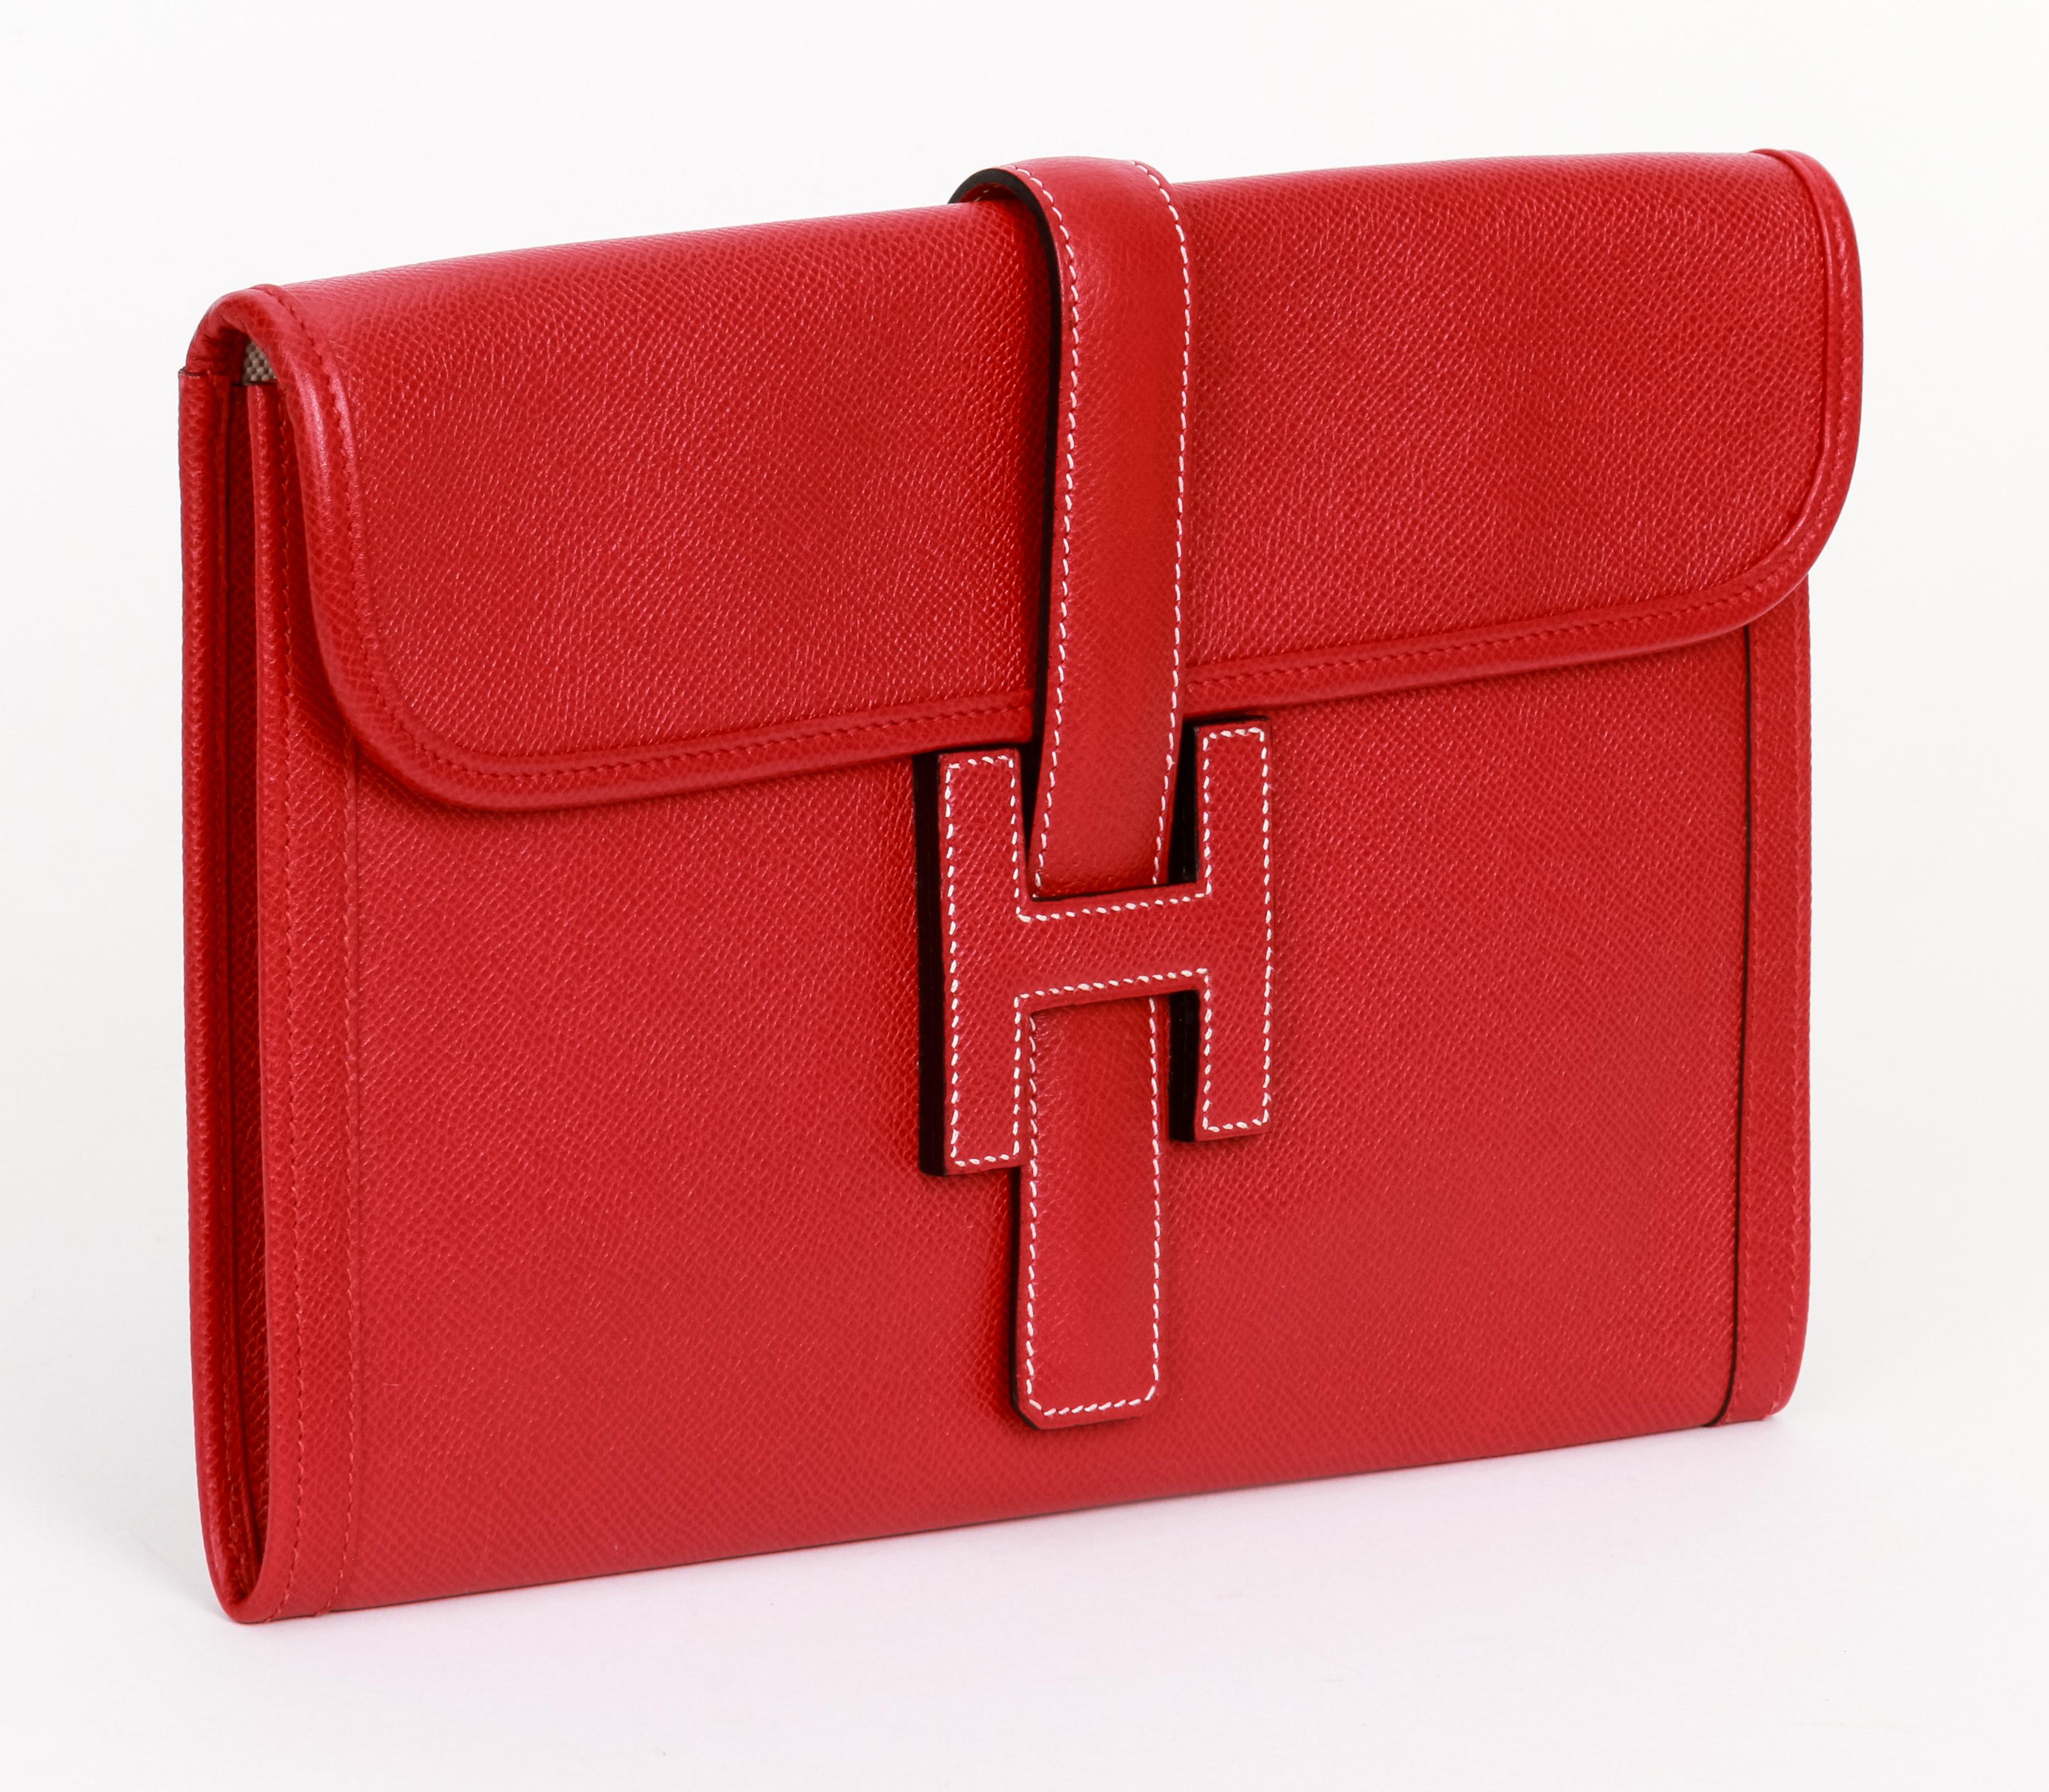 Hermès red epsom leather jige clutch. White contrast stitching, toile interior. Comes with original dust bag.